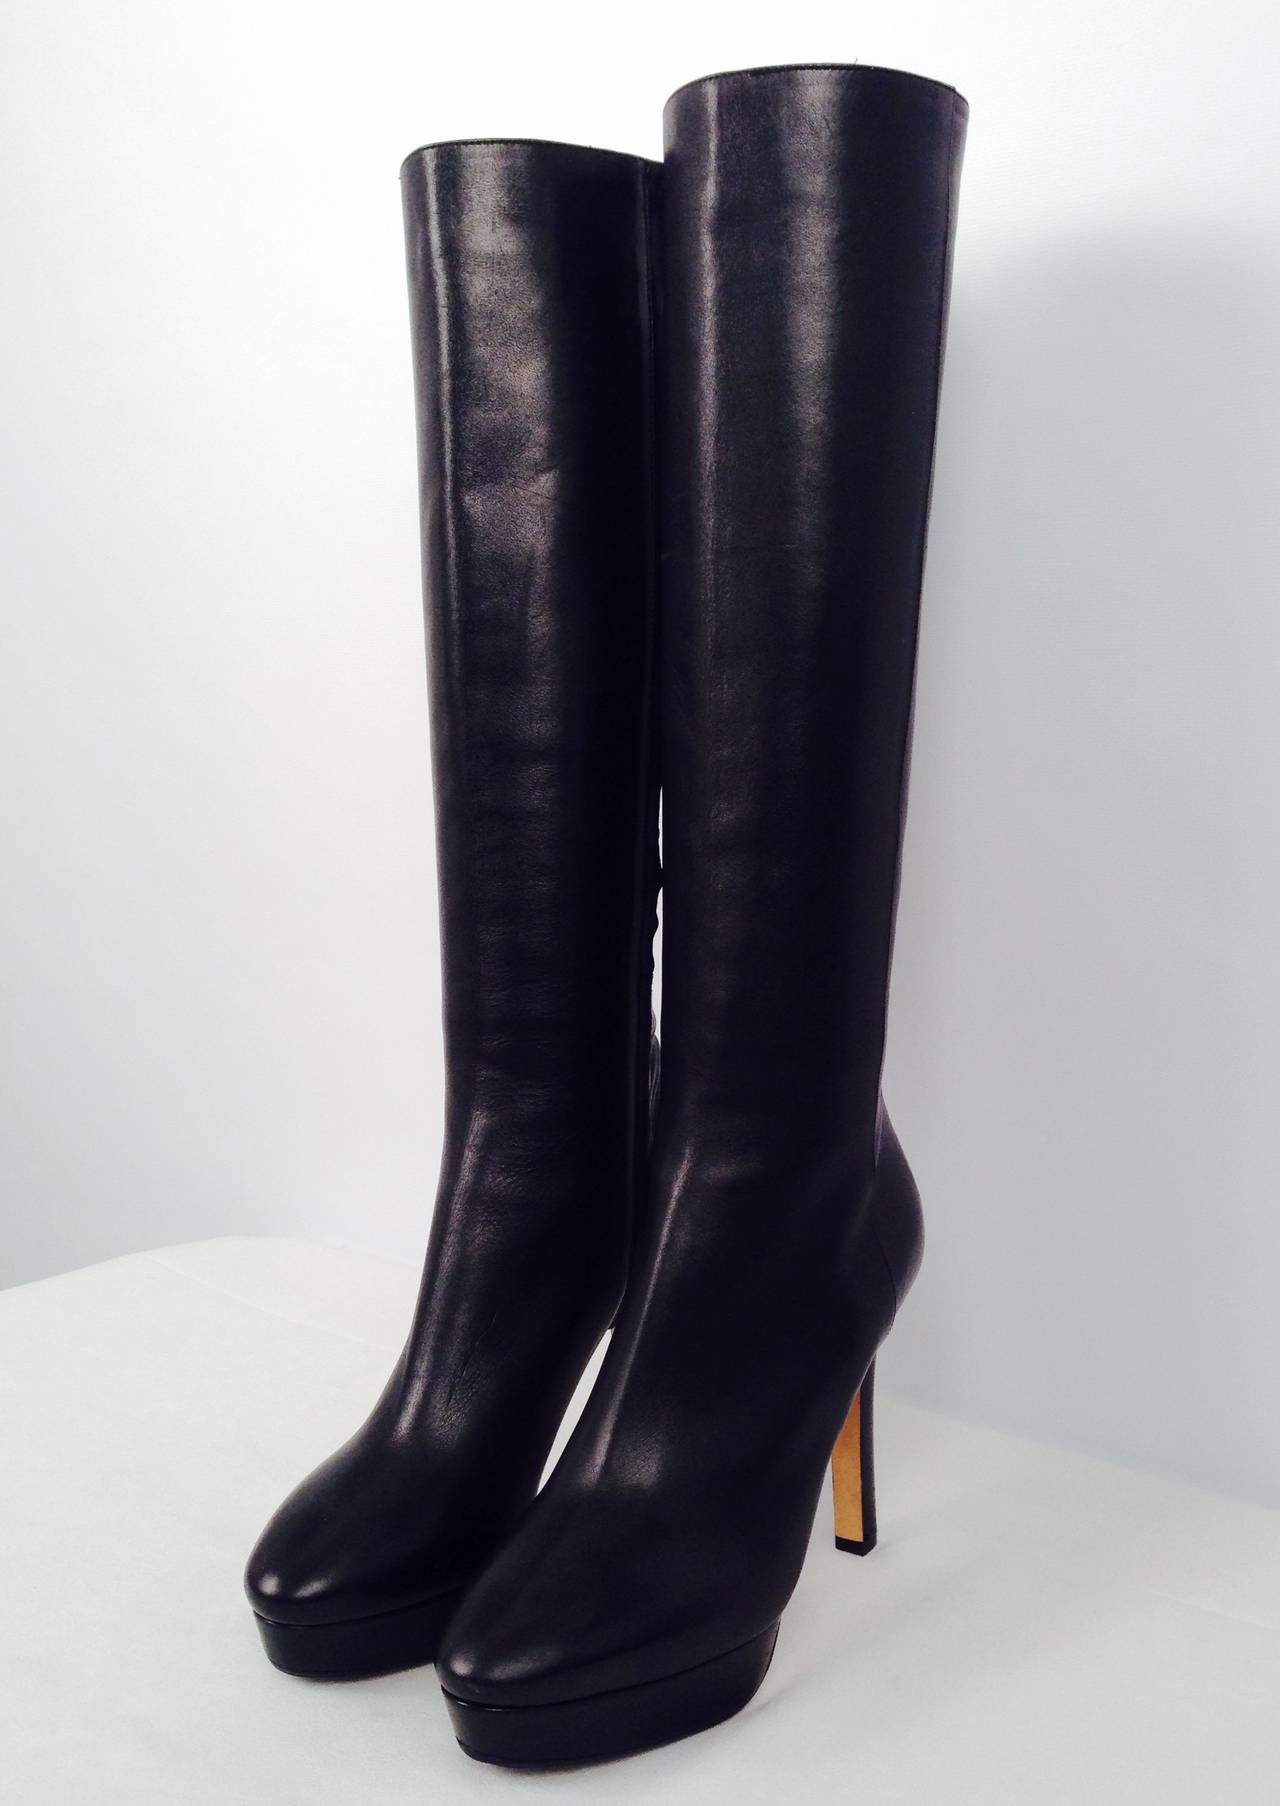 Brand New Jimmy Choo Black Platform Tall High Heel Boots In New Condition For Sale In Palm Beach, FL